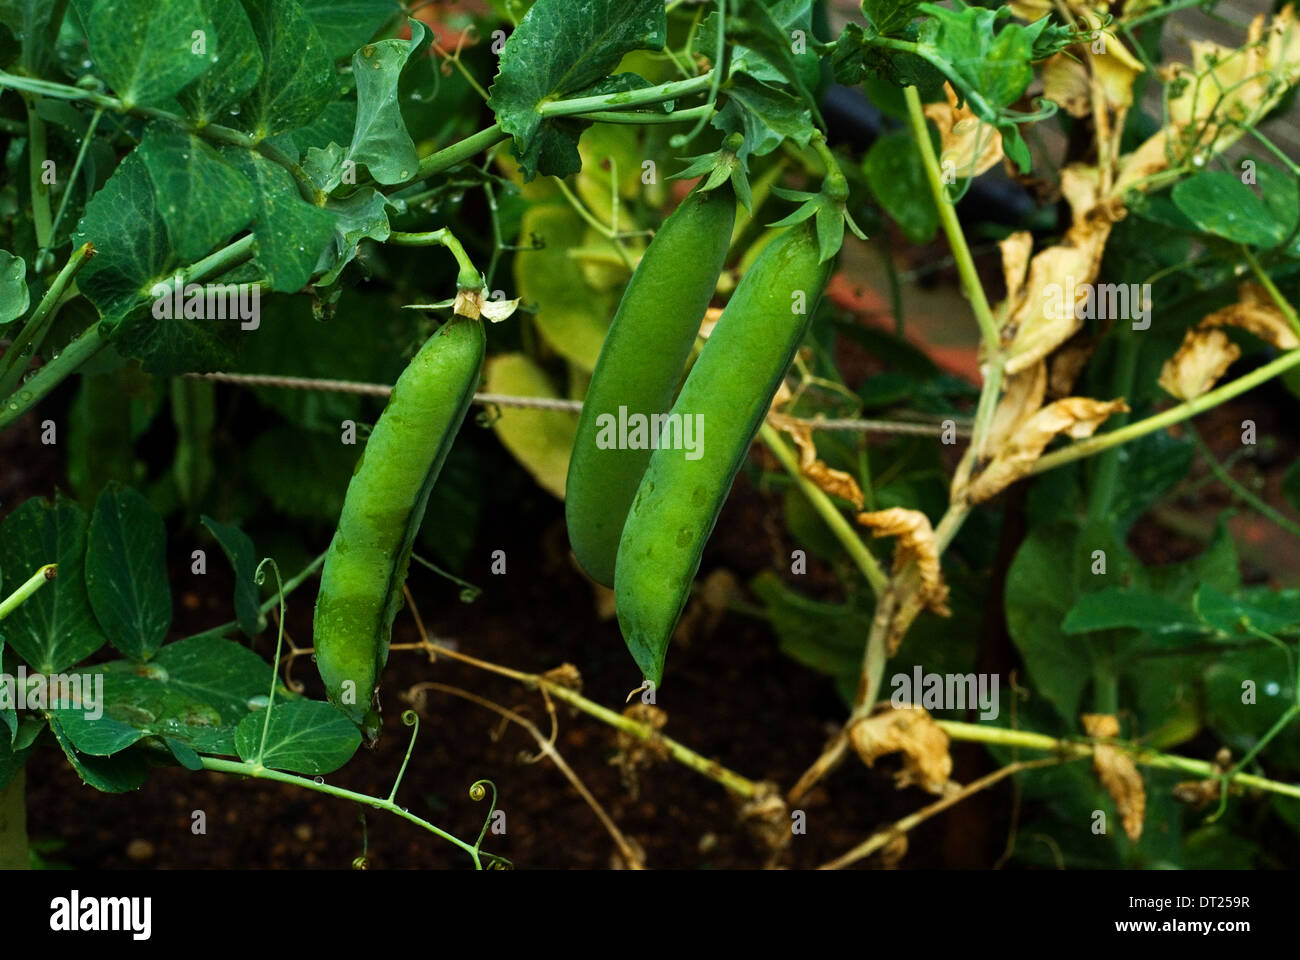 Pea plant with peas growing in the garden. Stock Photo